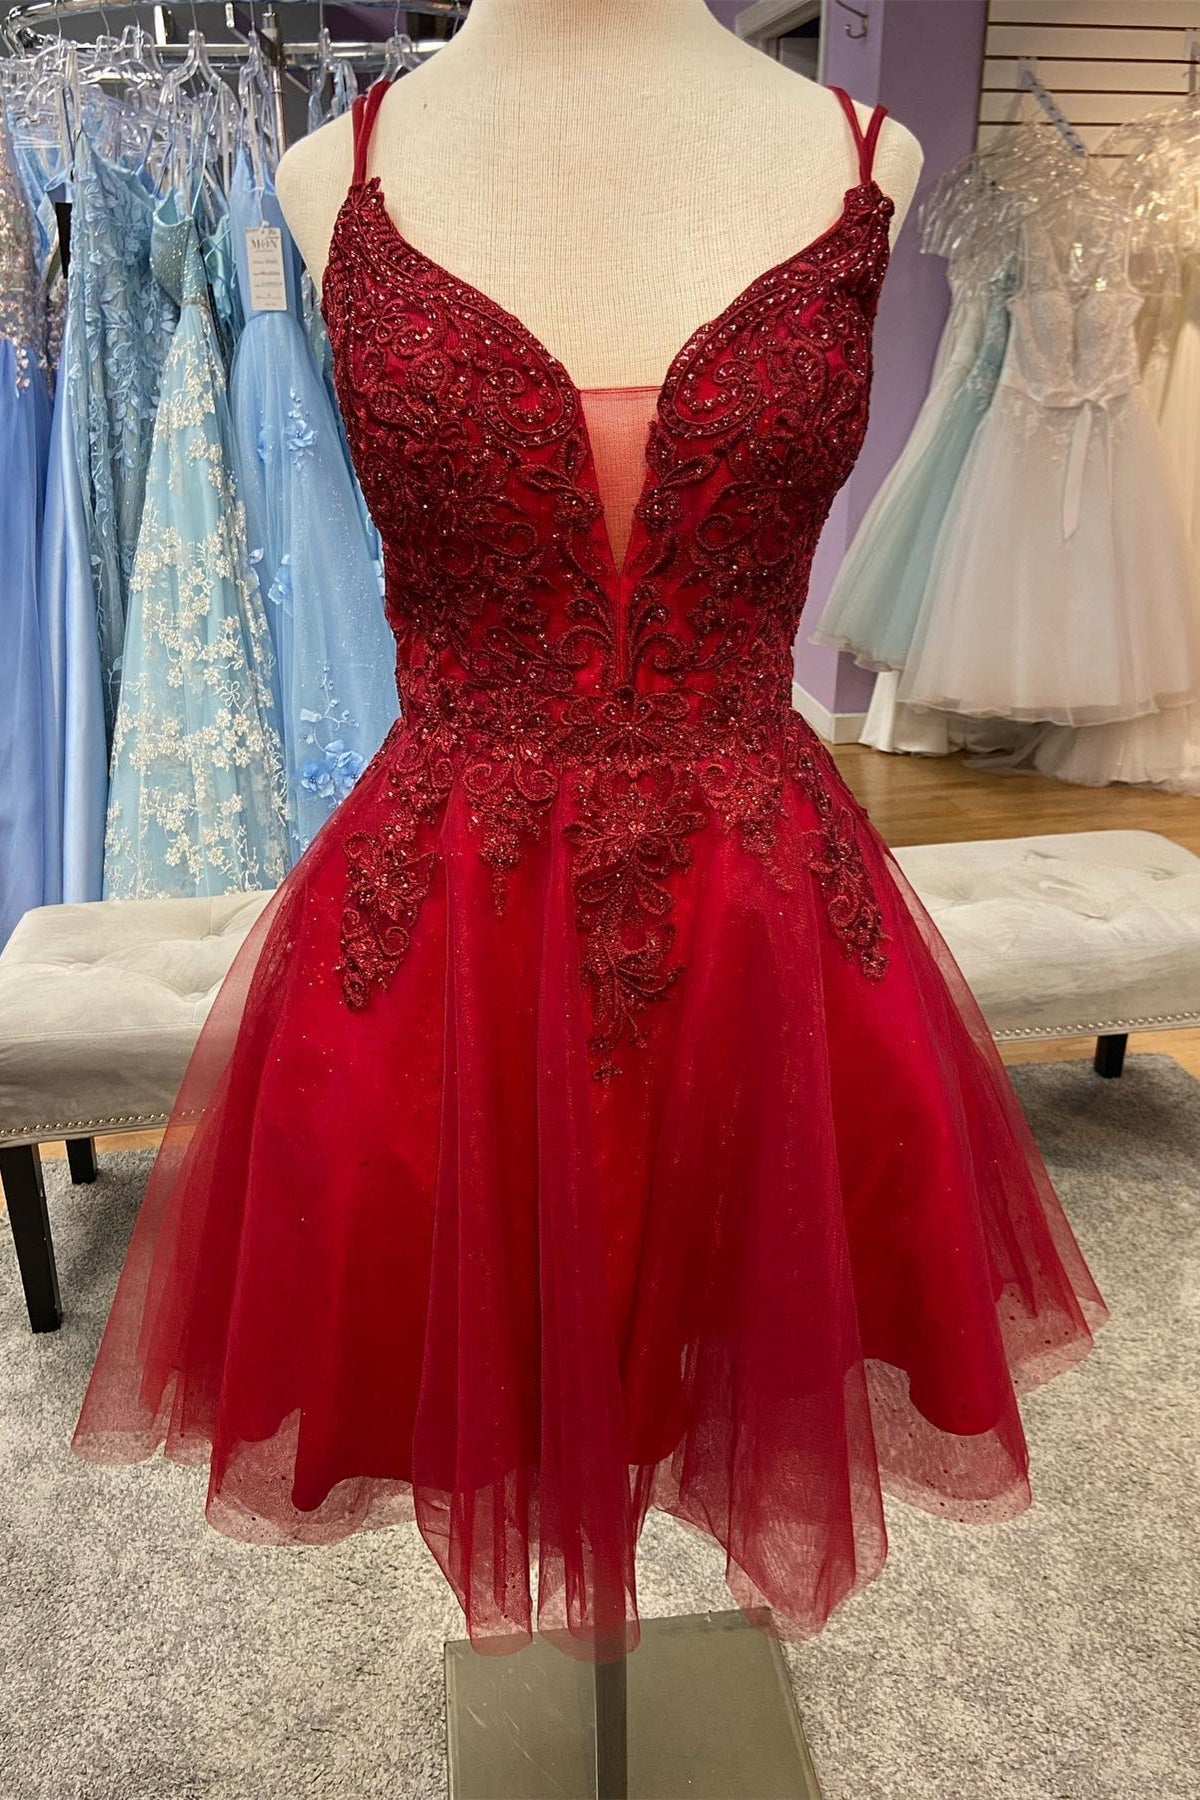 Red Plunging V Neck Lace-Up Appliques Tulle Corset Homecoming Dress outfit, Bachelorette Party Outfit